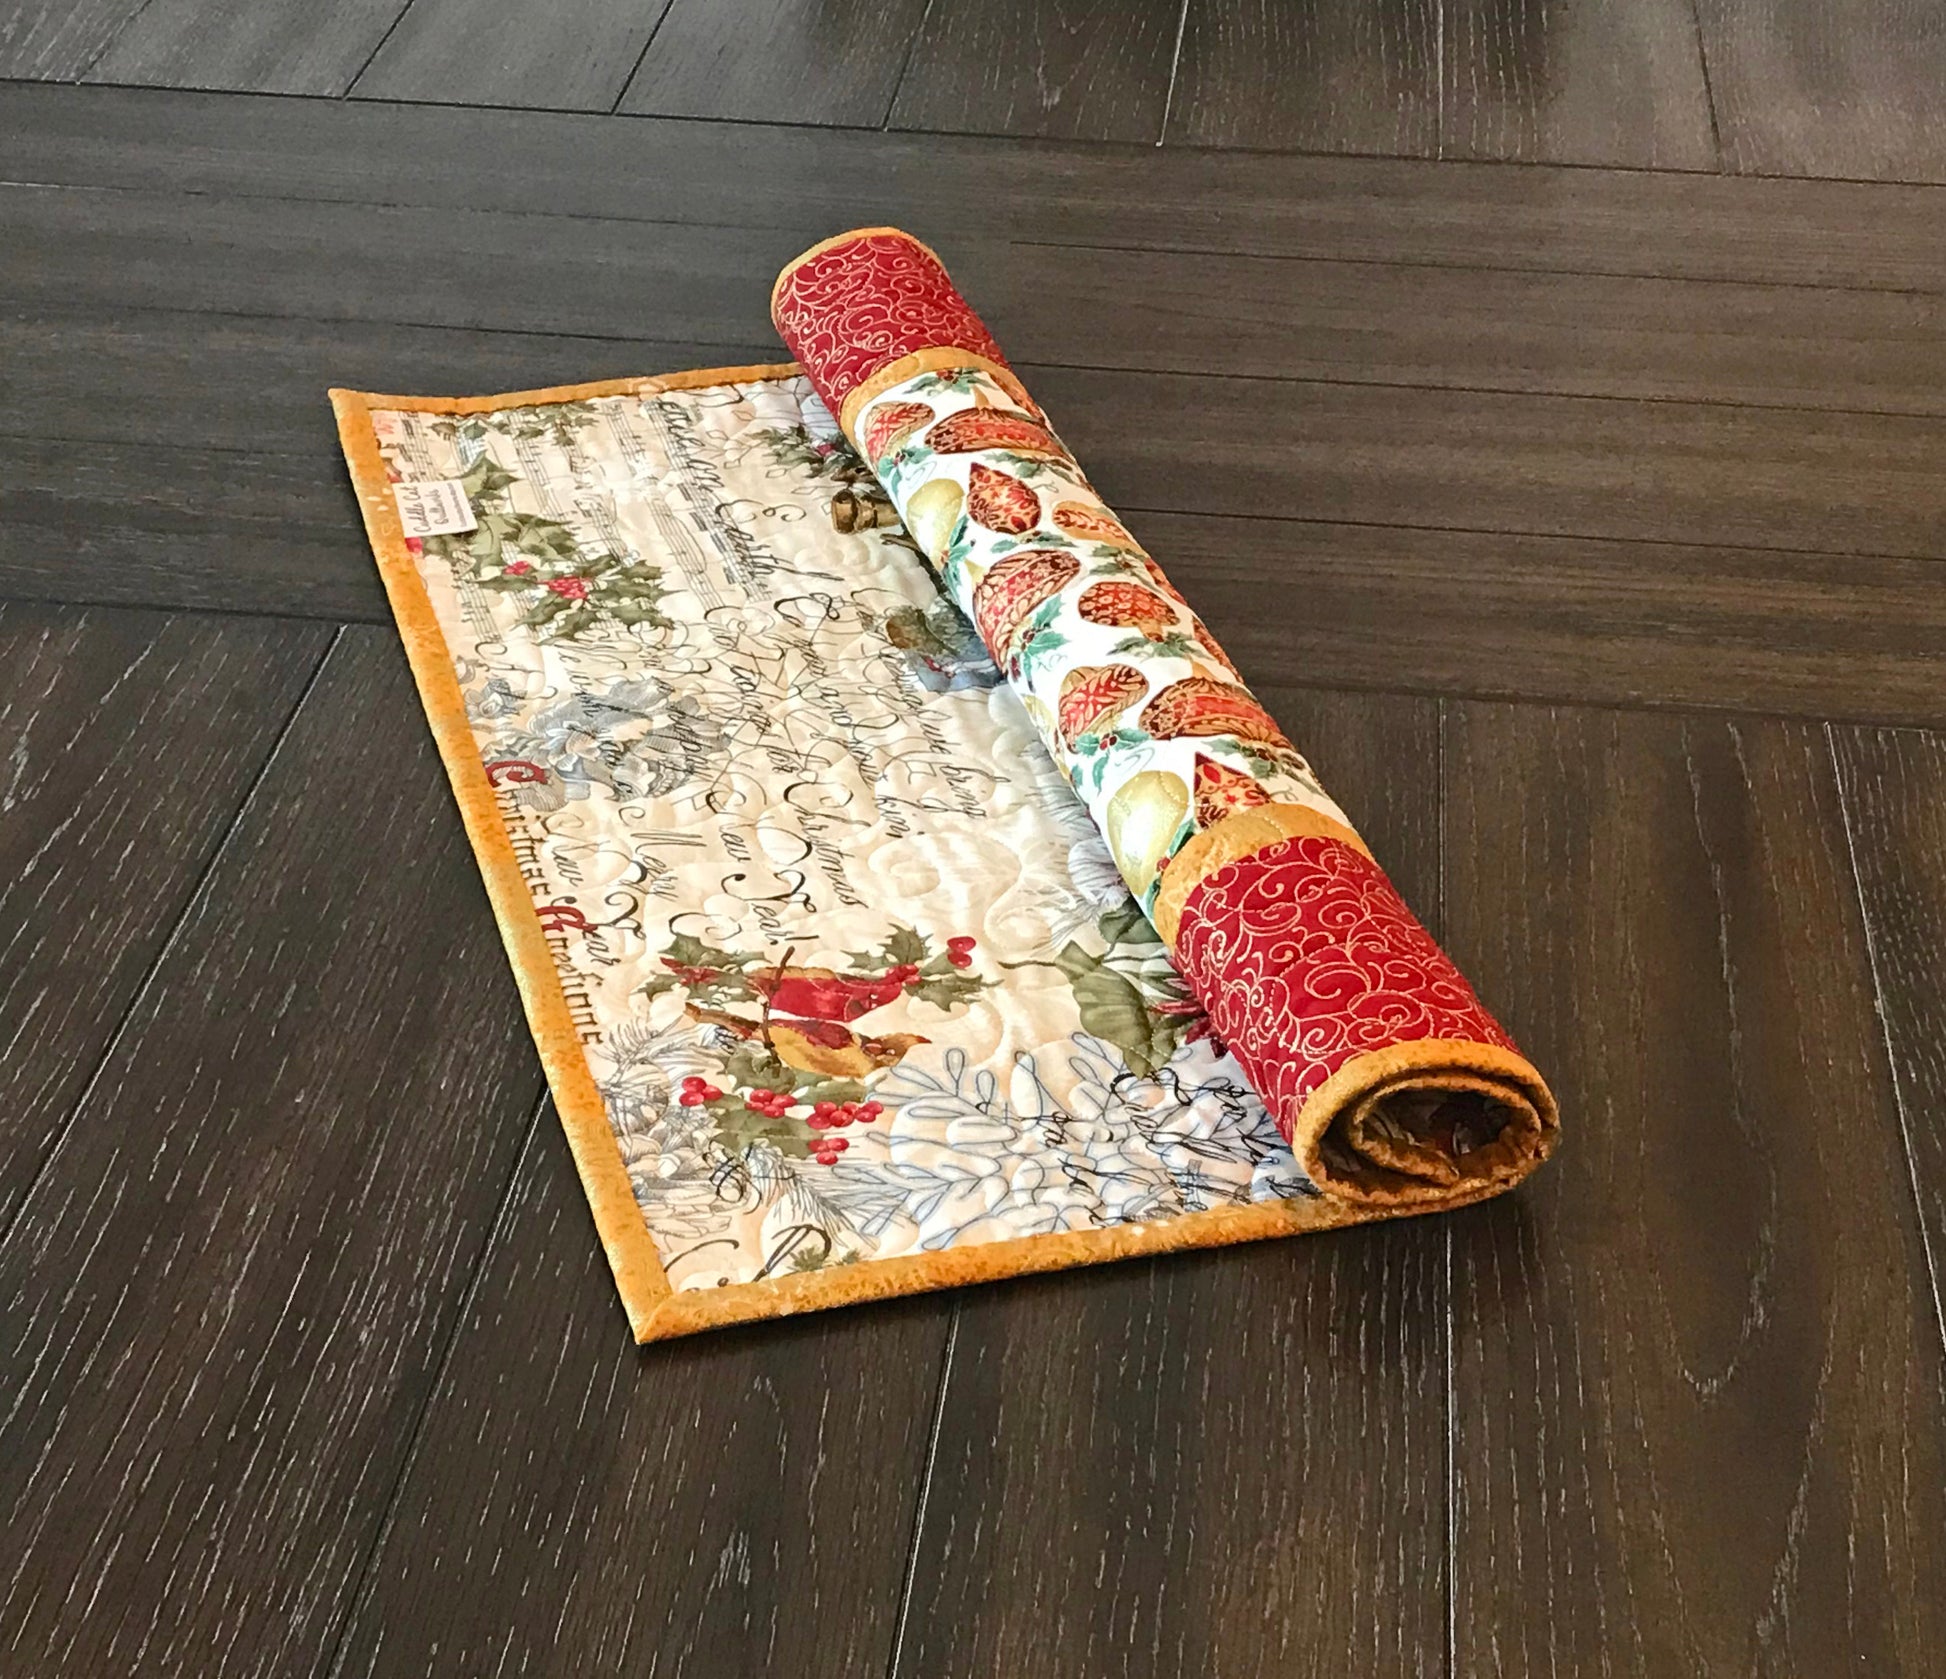 Red & Gold Christmas Ornament Table Topper - Handmade Quilts, Digital Patterns, and Home Décor items online - Cuddle Cat Quiltworks